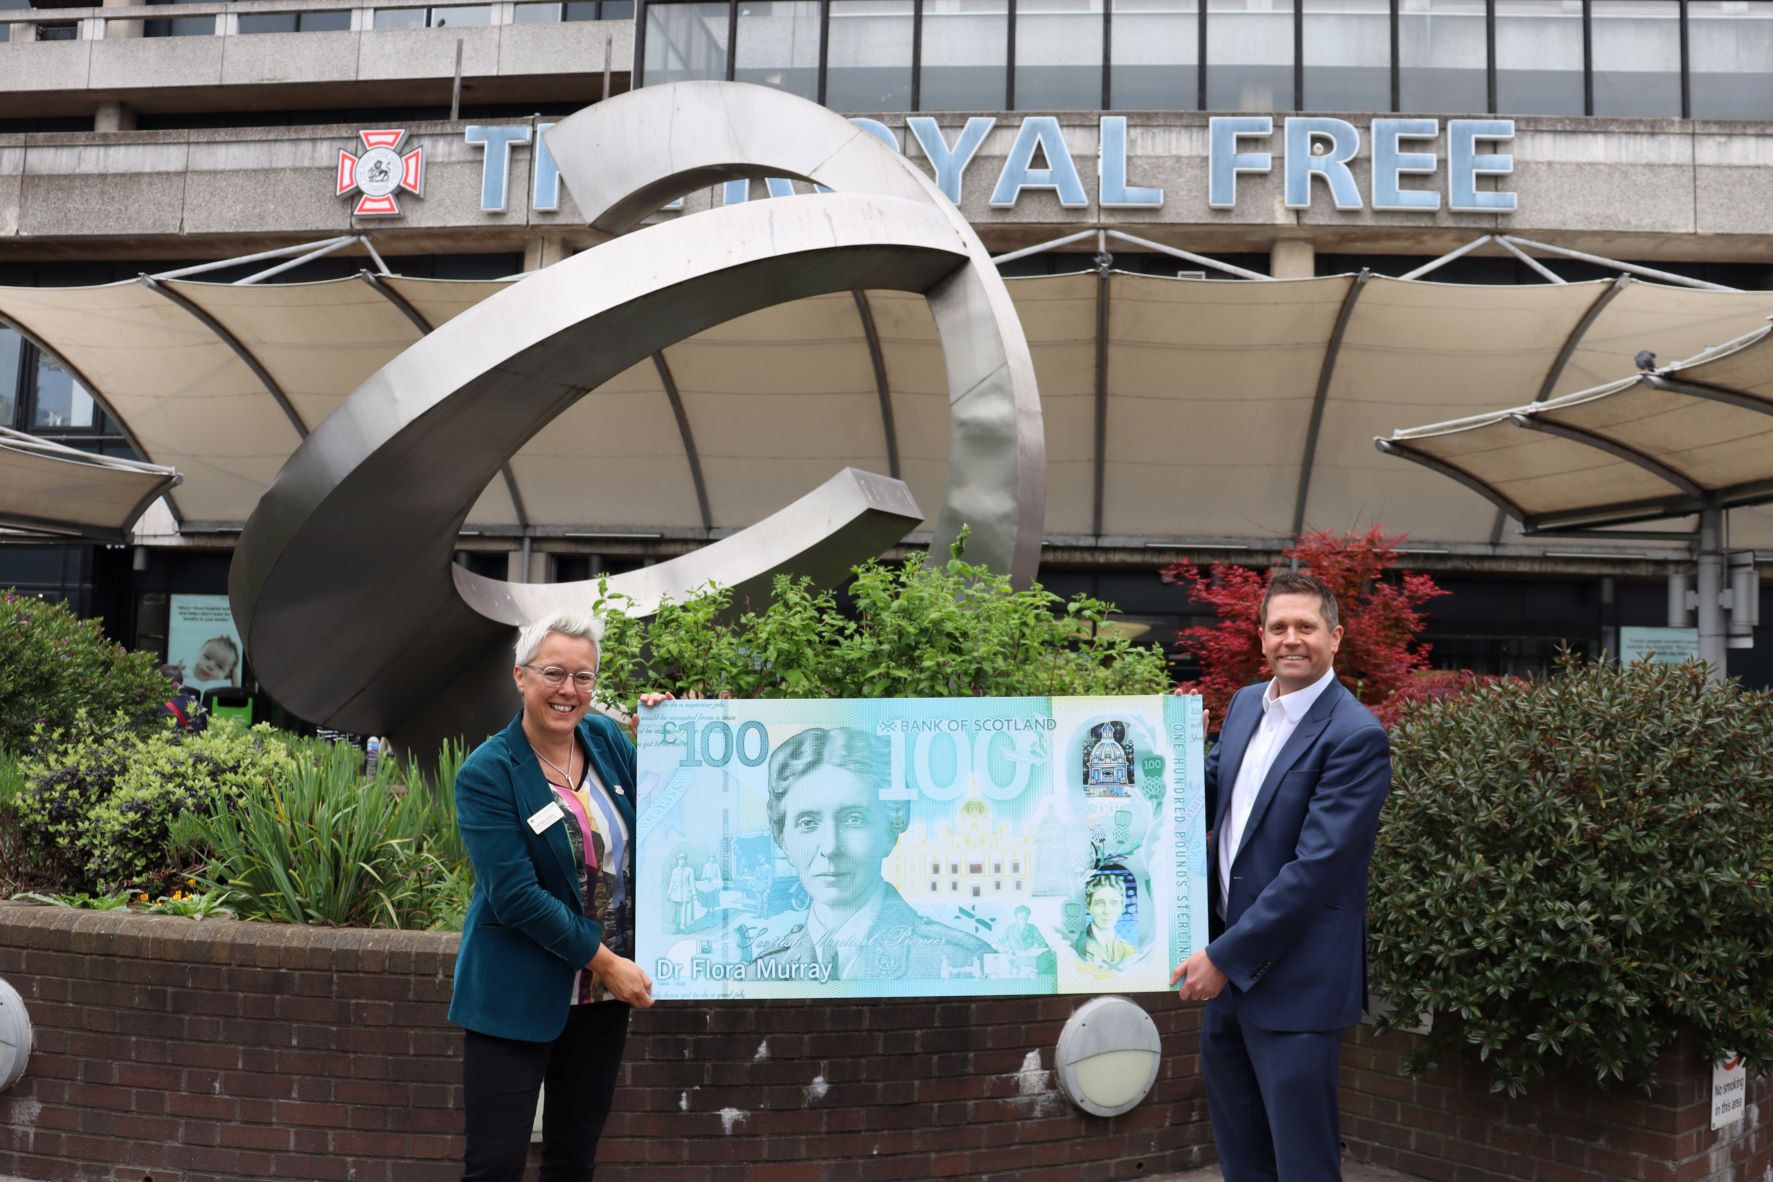 Caroline Clarke, chief executive of the Royal Free London NHS Foundation Trust and Jon Spiers, chief executive of the Royal Free Charity, pictured with a large replica banknote featuring Dr Flora Murray